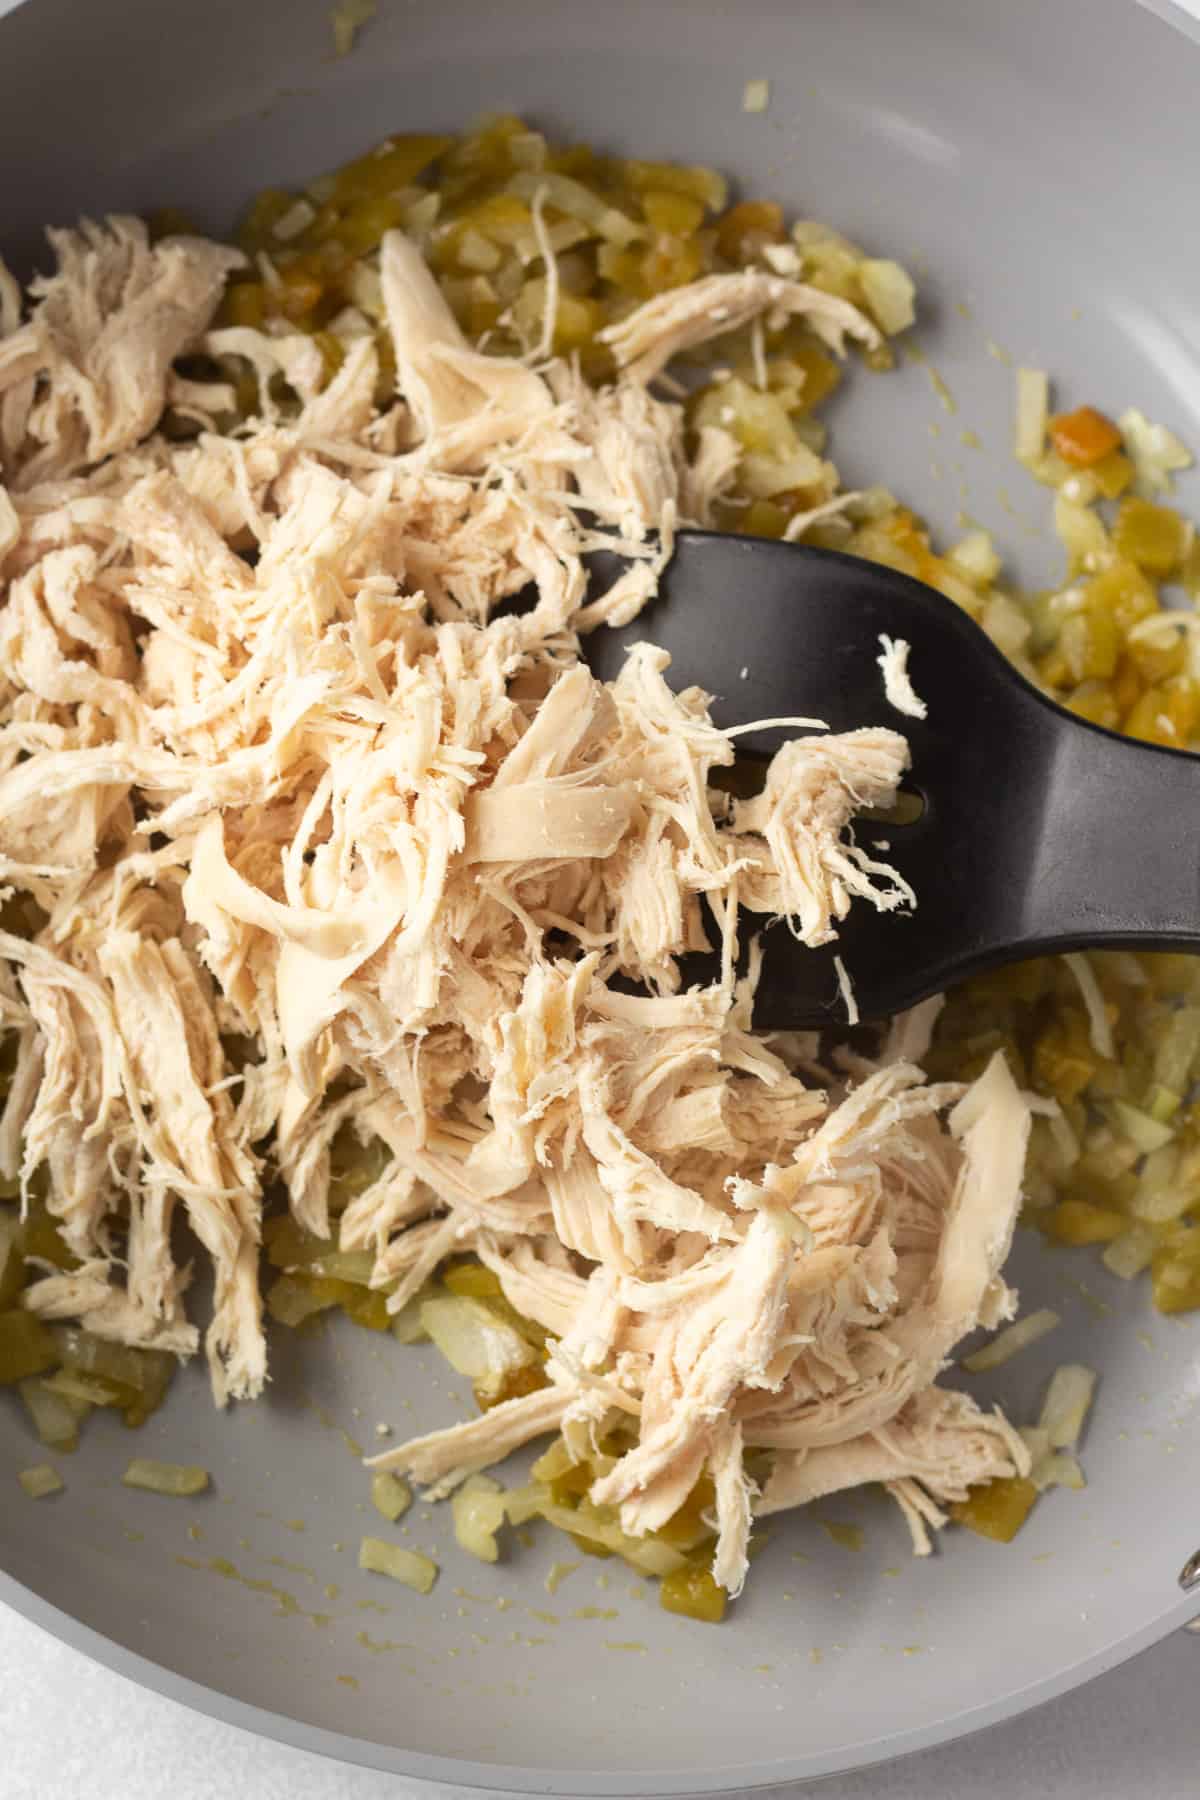 Shredded chicken being stirred into cooked diced onion and green chilis in a gray pan.